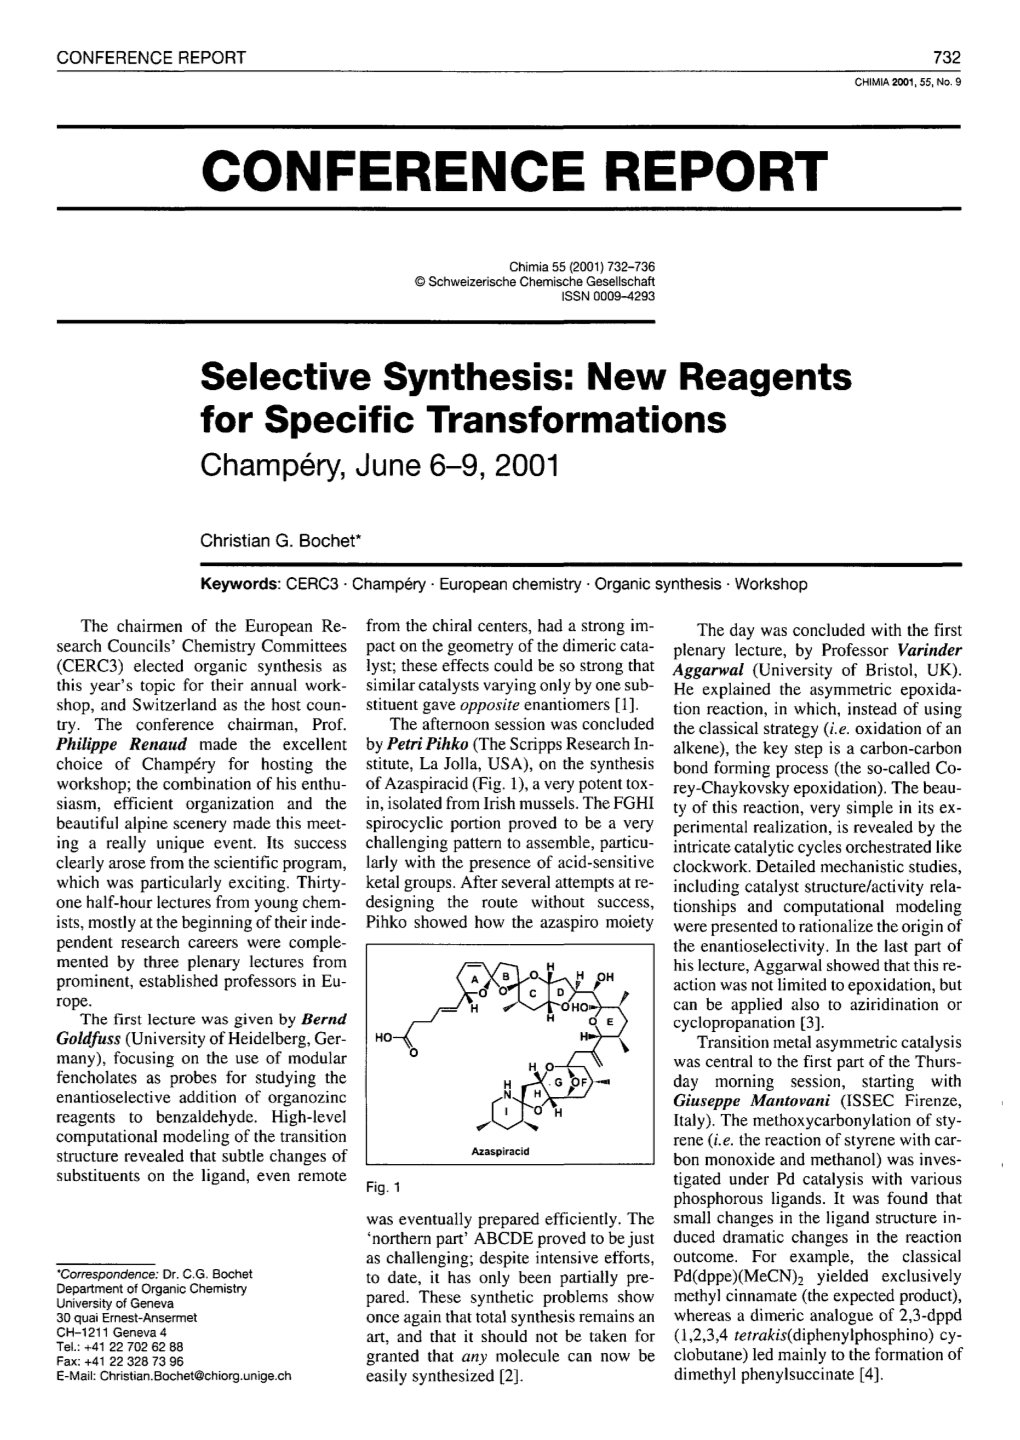 Selective Synthesis: New Reagents for Specific Transformations Champery, June 6-9, 2001